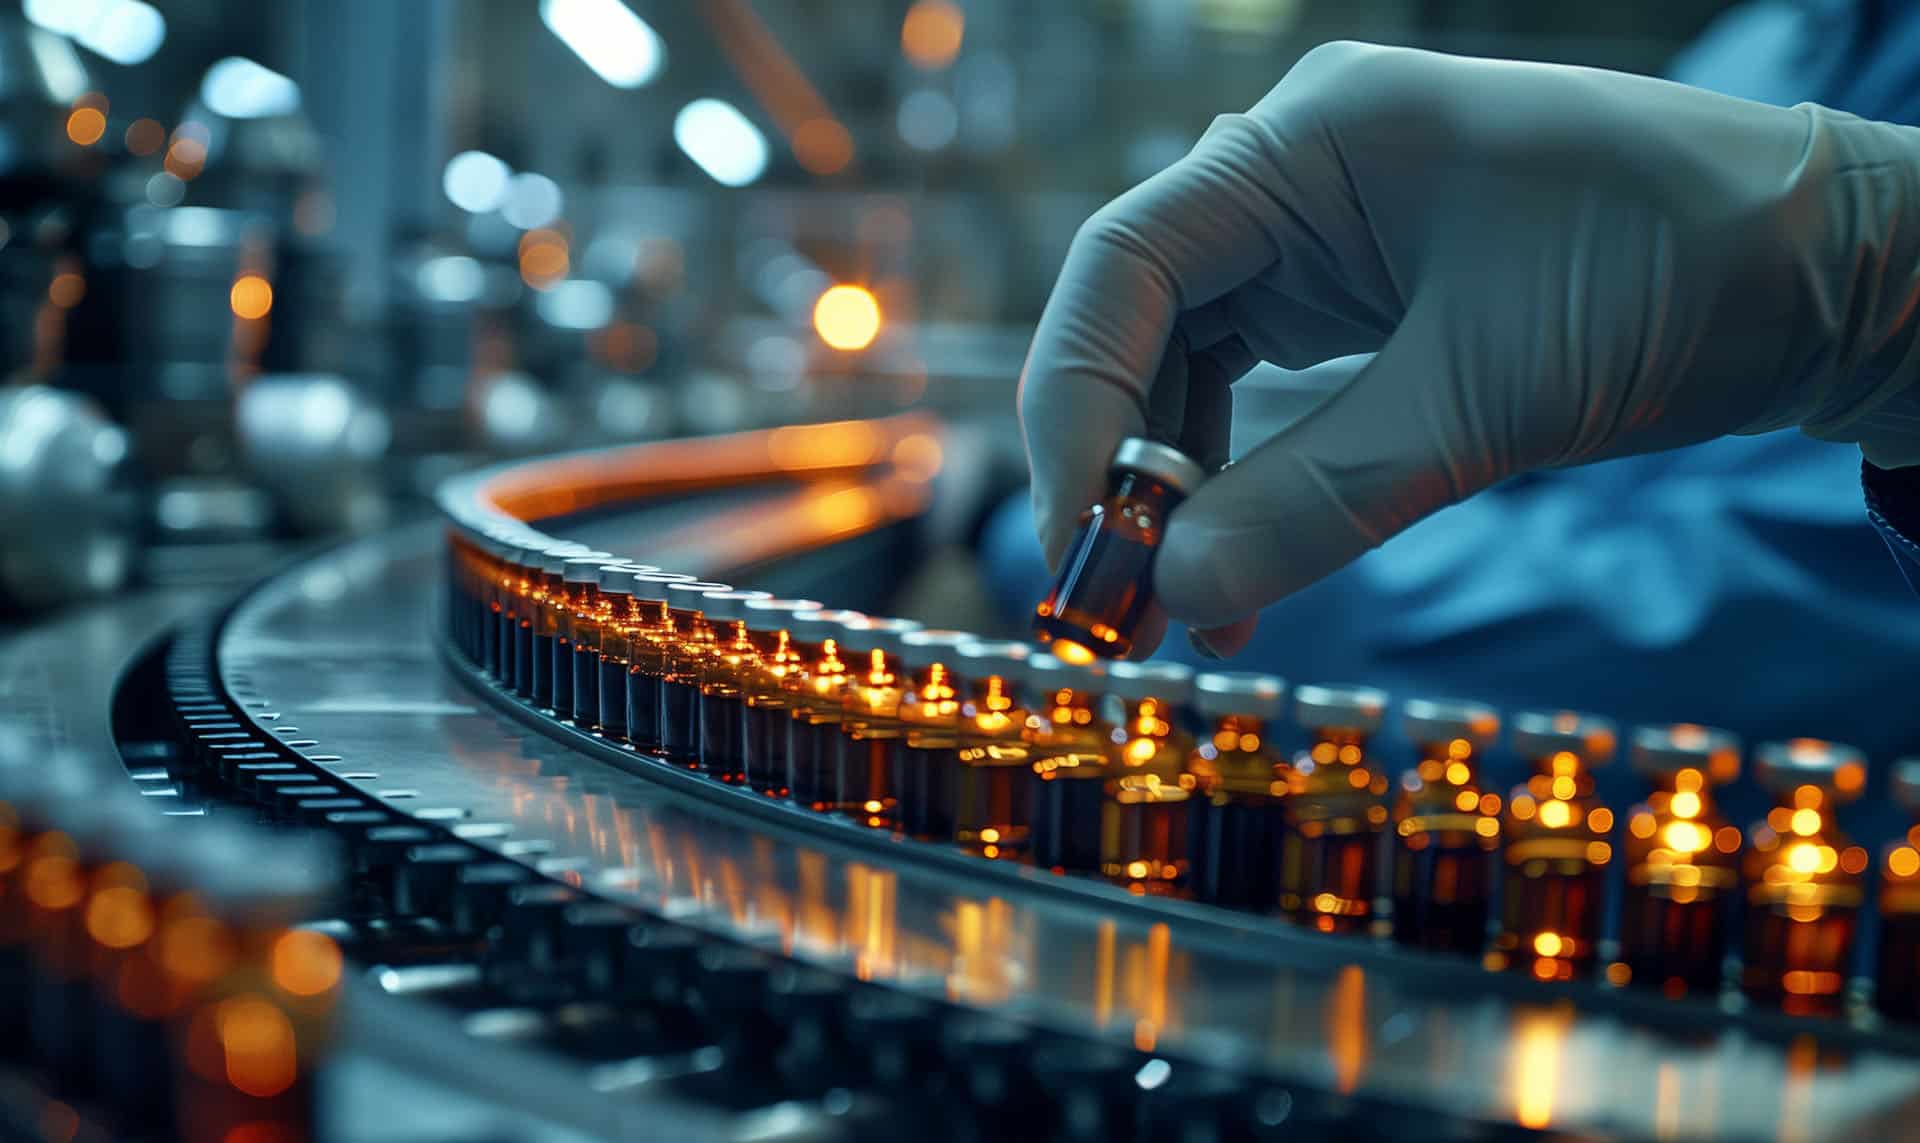 A gloved hand places a vial onto a conveyor belt filled with identical vials in a brightly lit manufacturing facility, likely producing medication or vaccines. The focus is on the hand and vial, emphasizing precision and sterility in the process.